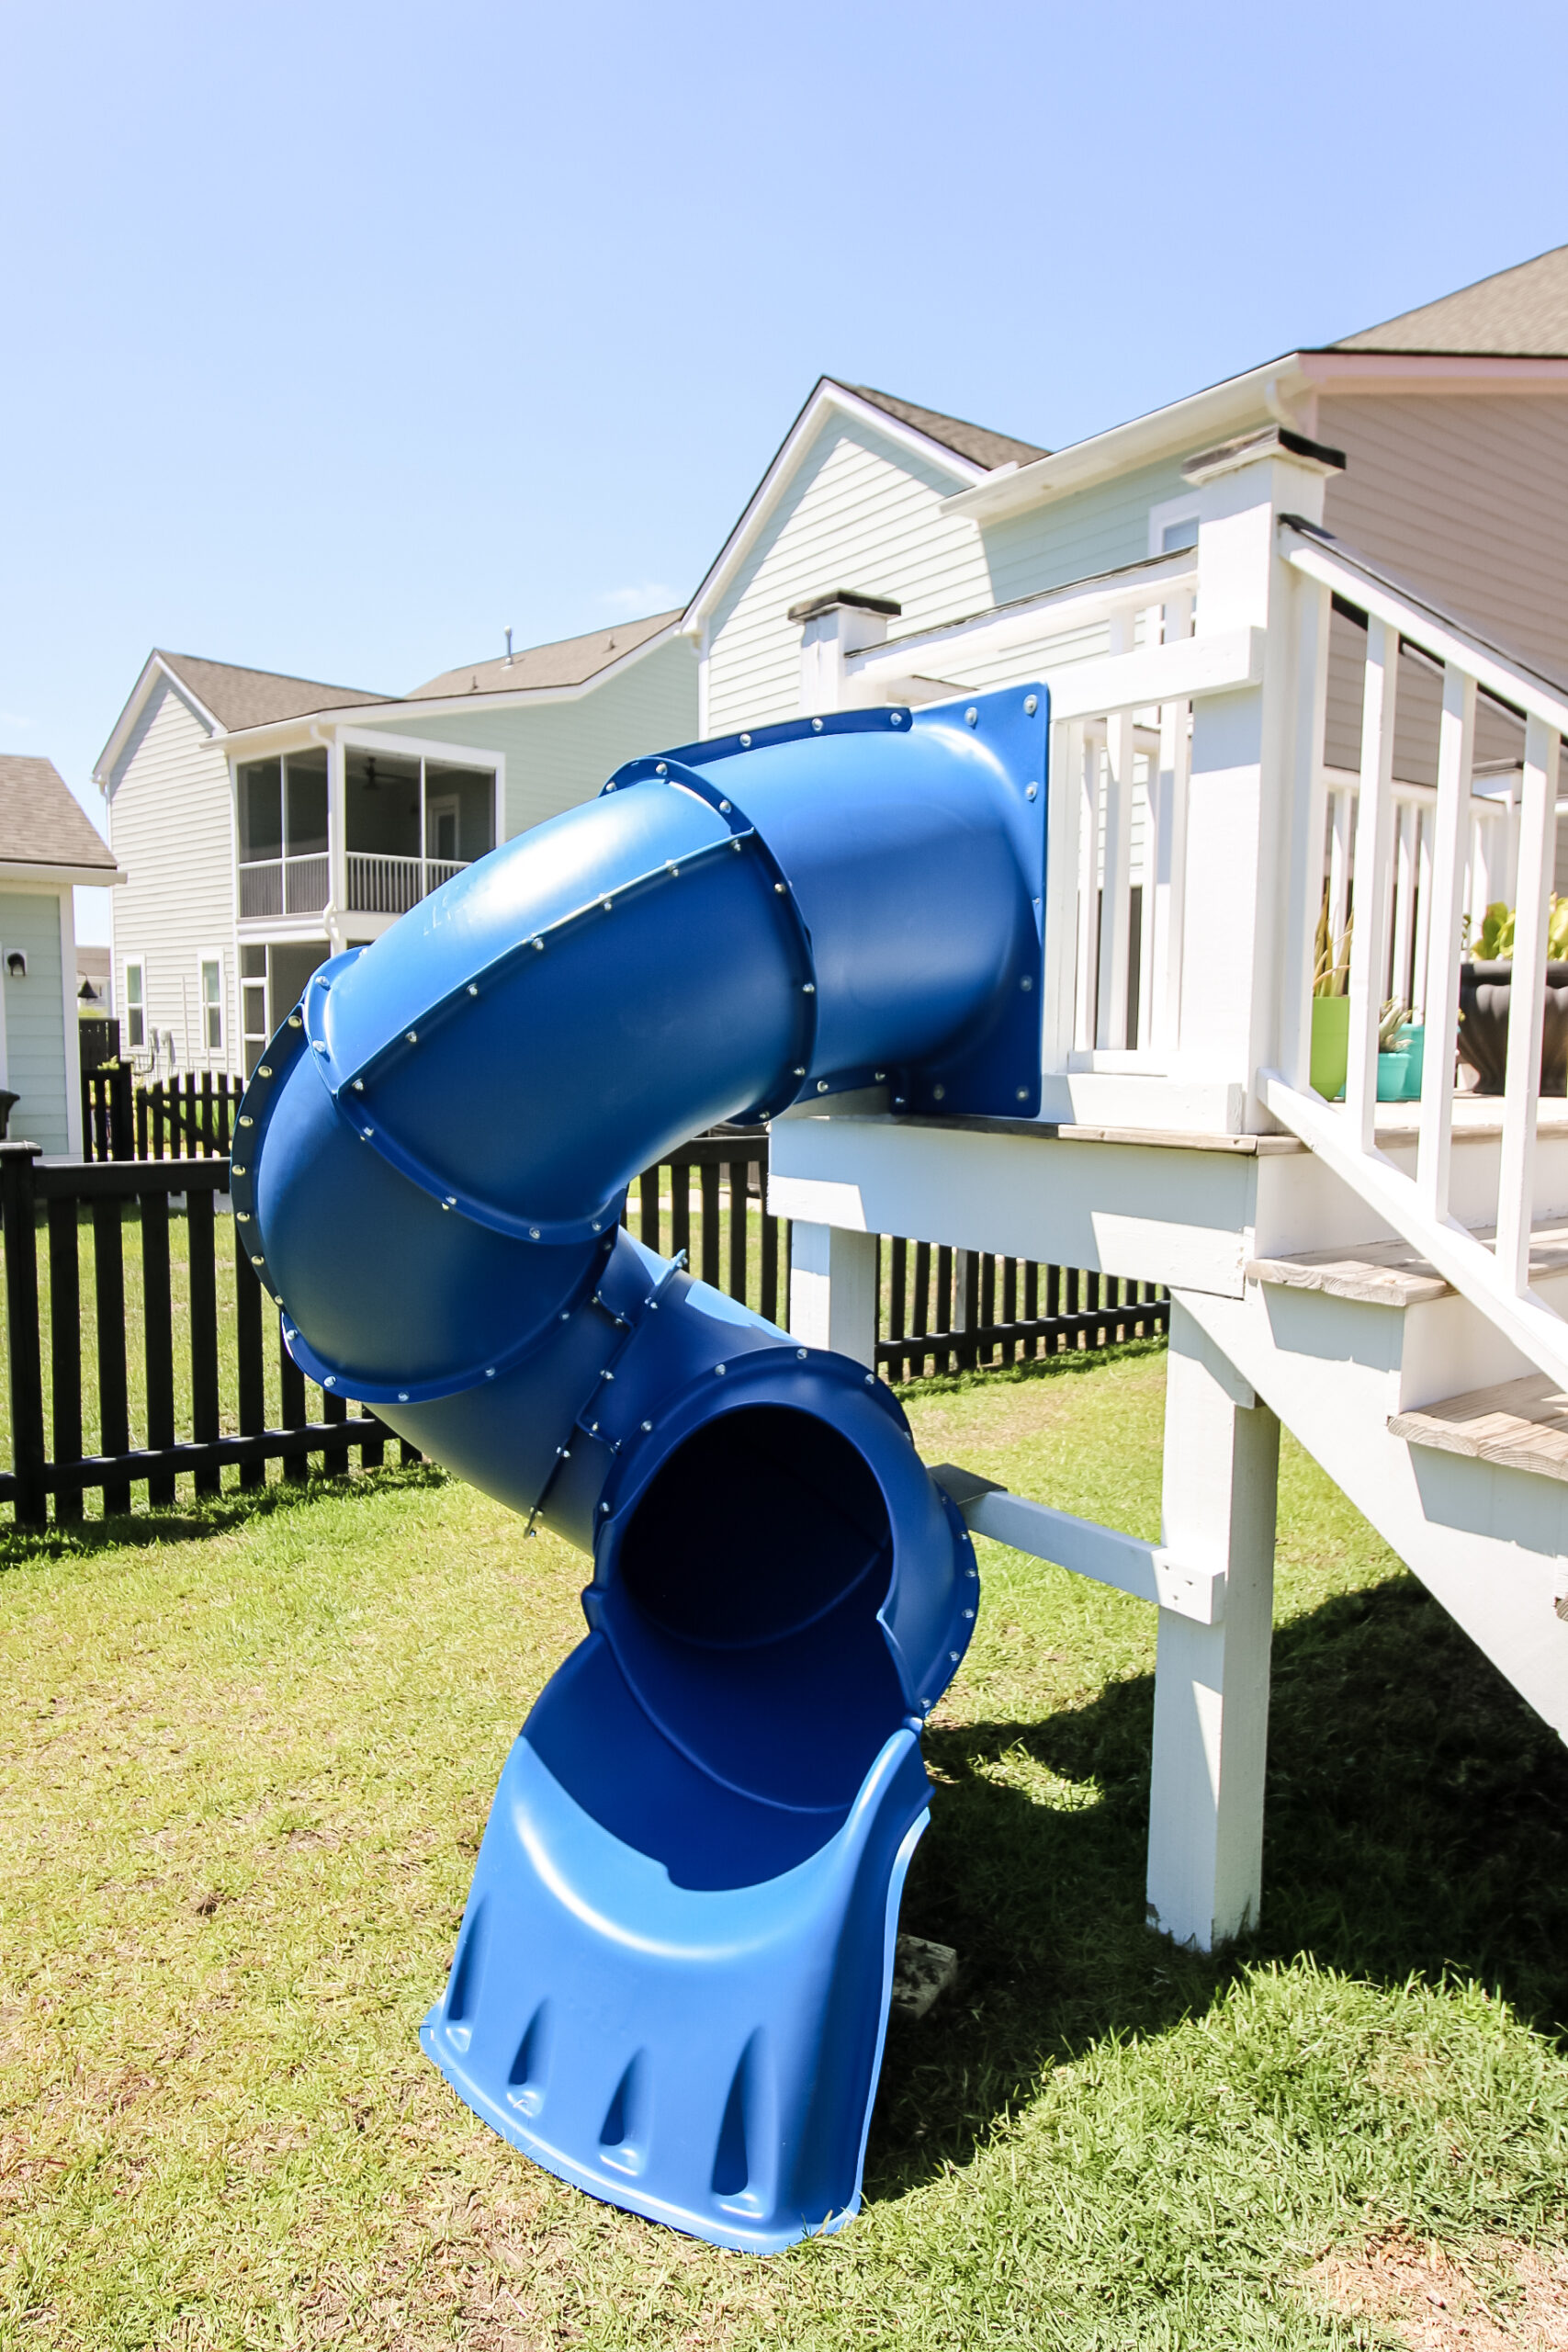 How to add a slide to a backyard deck - Charleston Crafted